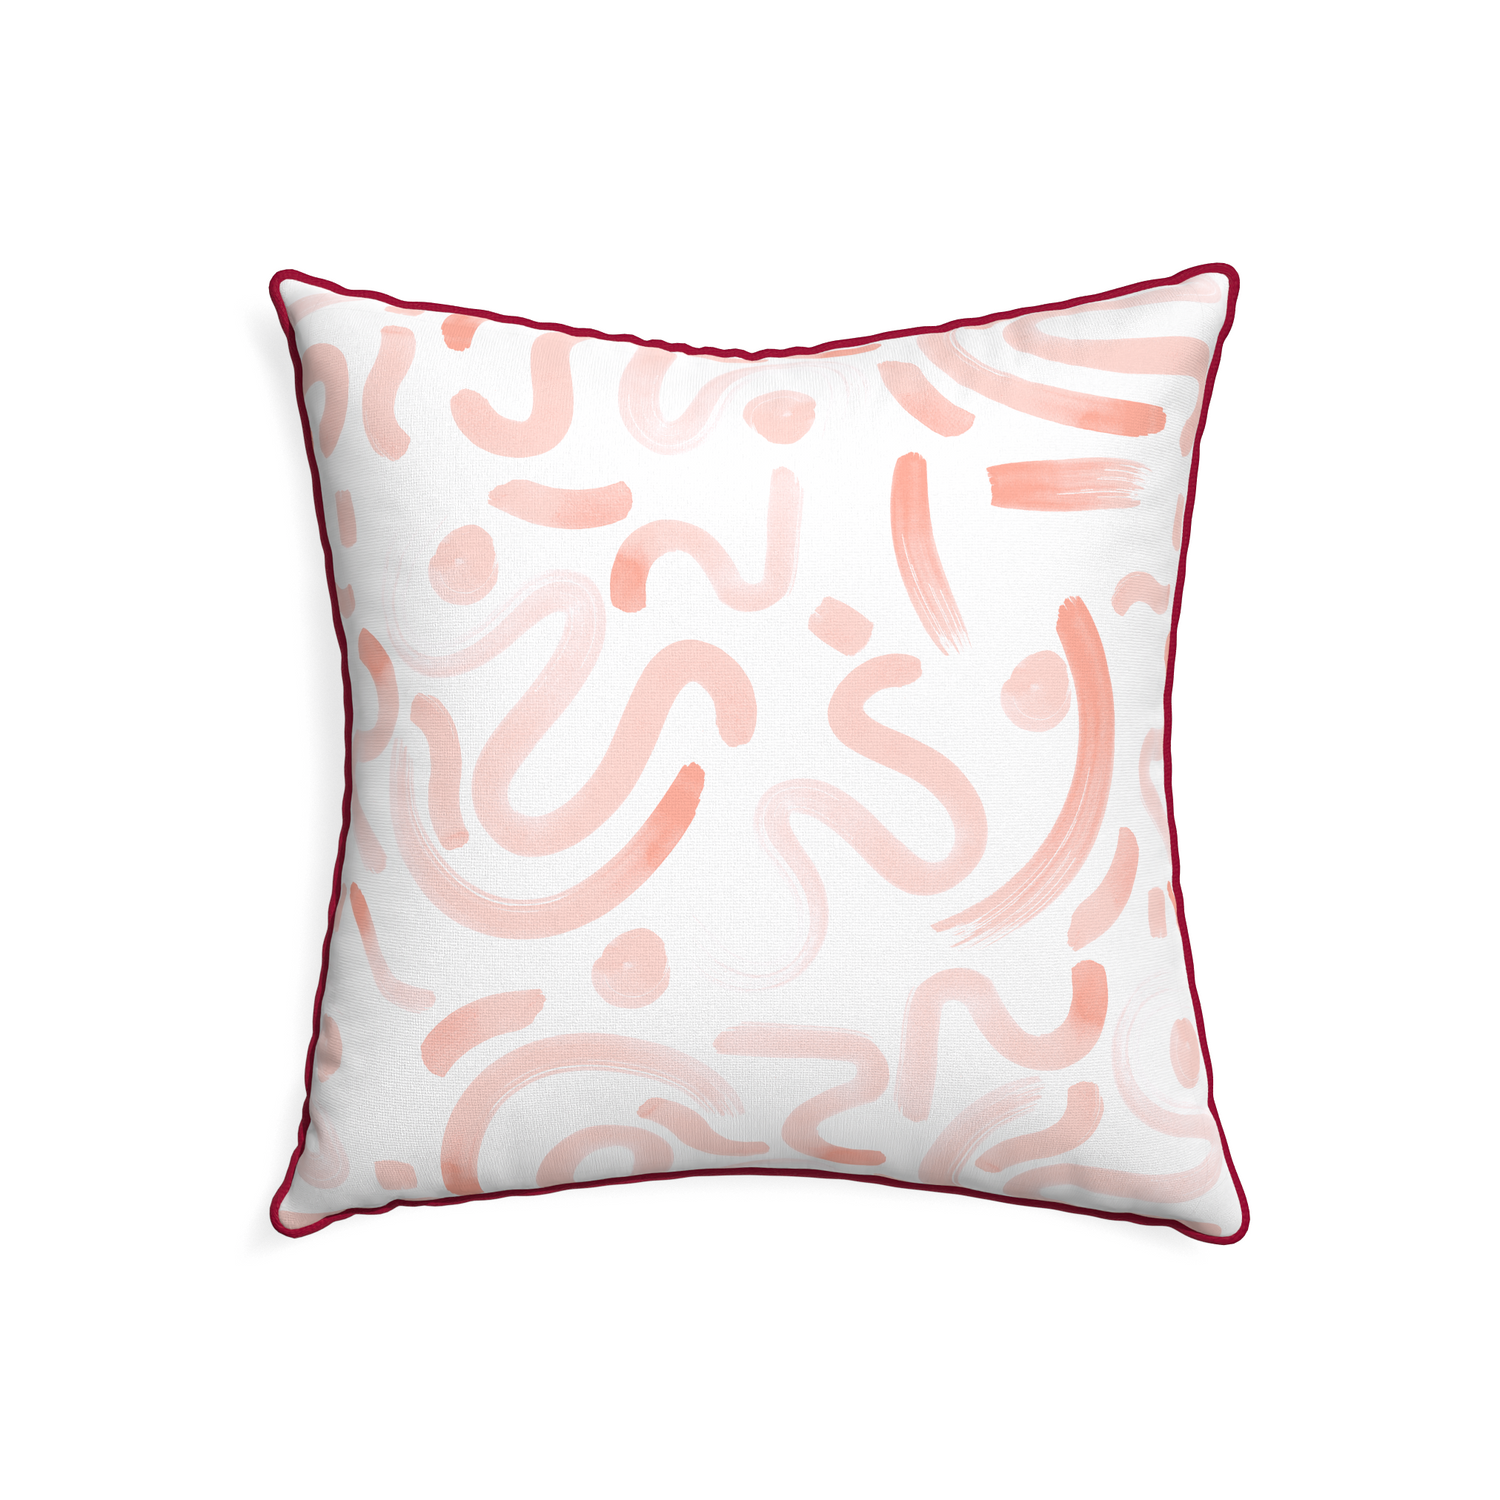 22-square hockney pink custom pillow with raspberry piping on white background